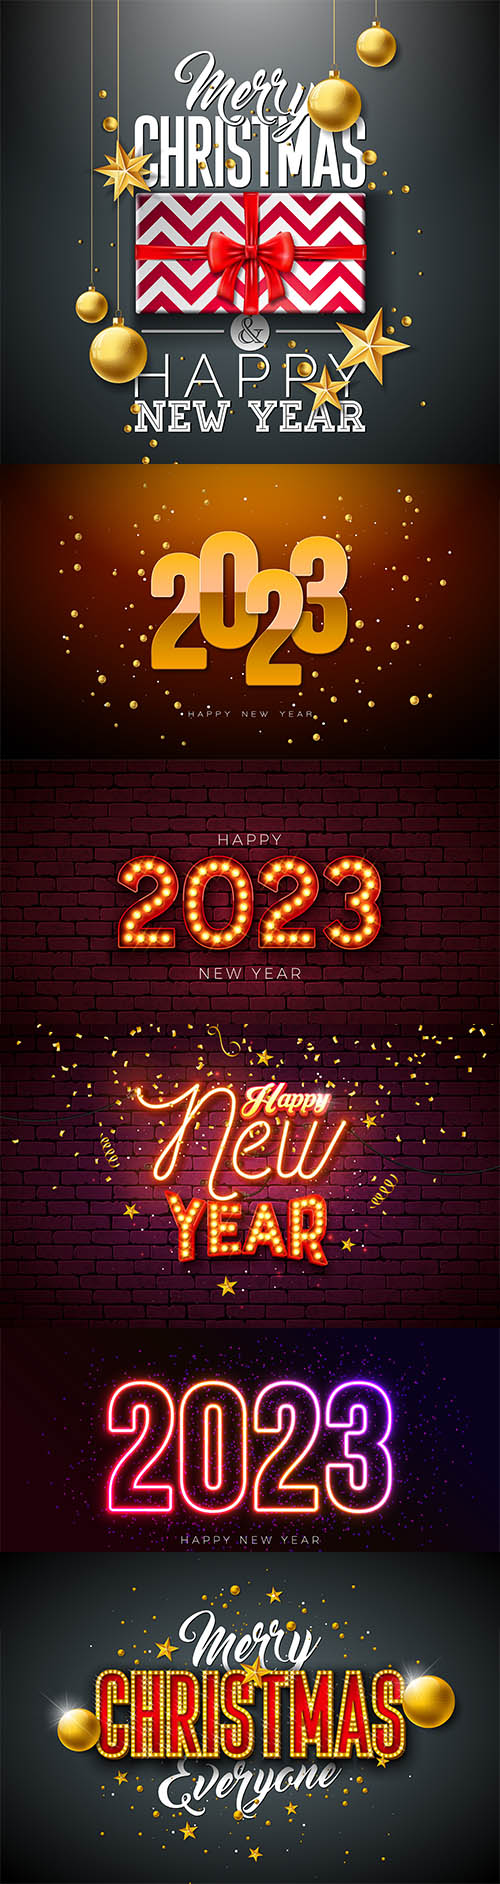 Happy new year 2023 illustration with gold ornamental ball and falling confetti on shiny background